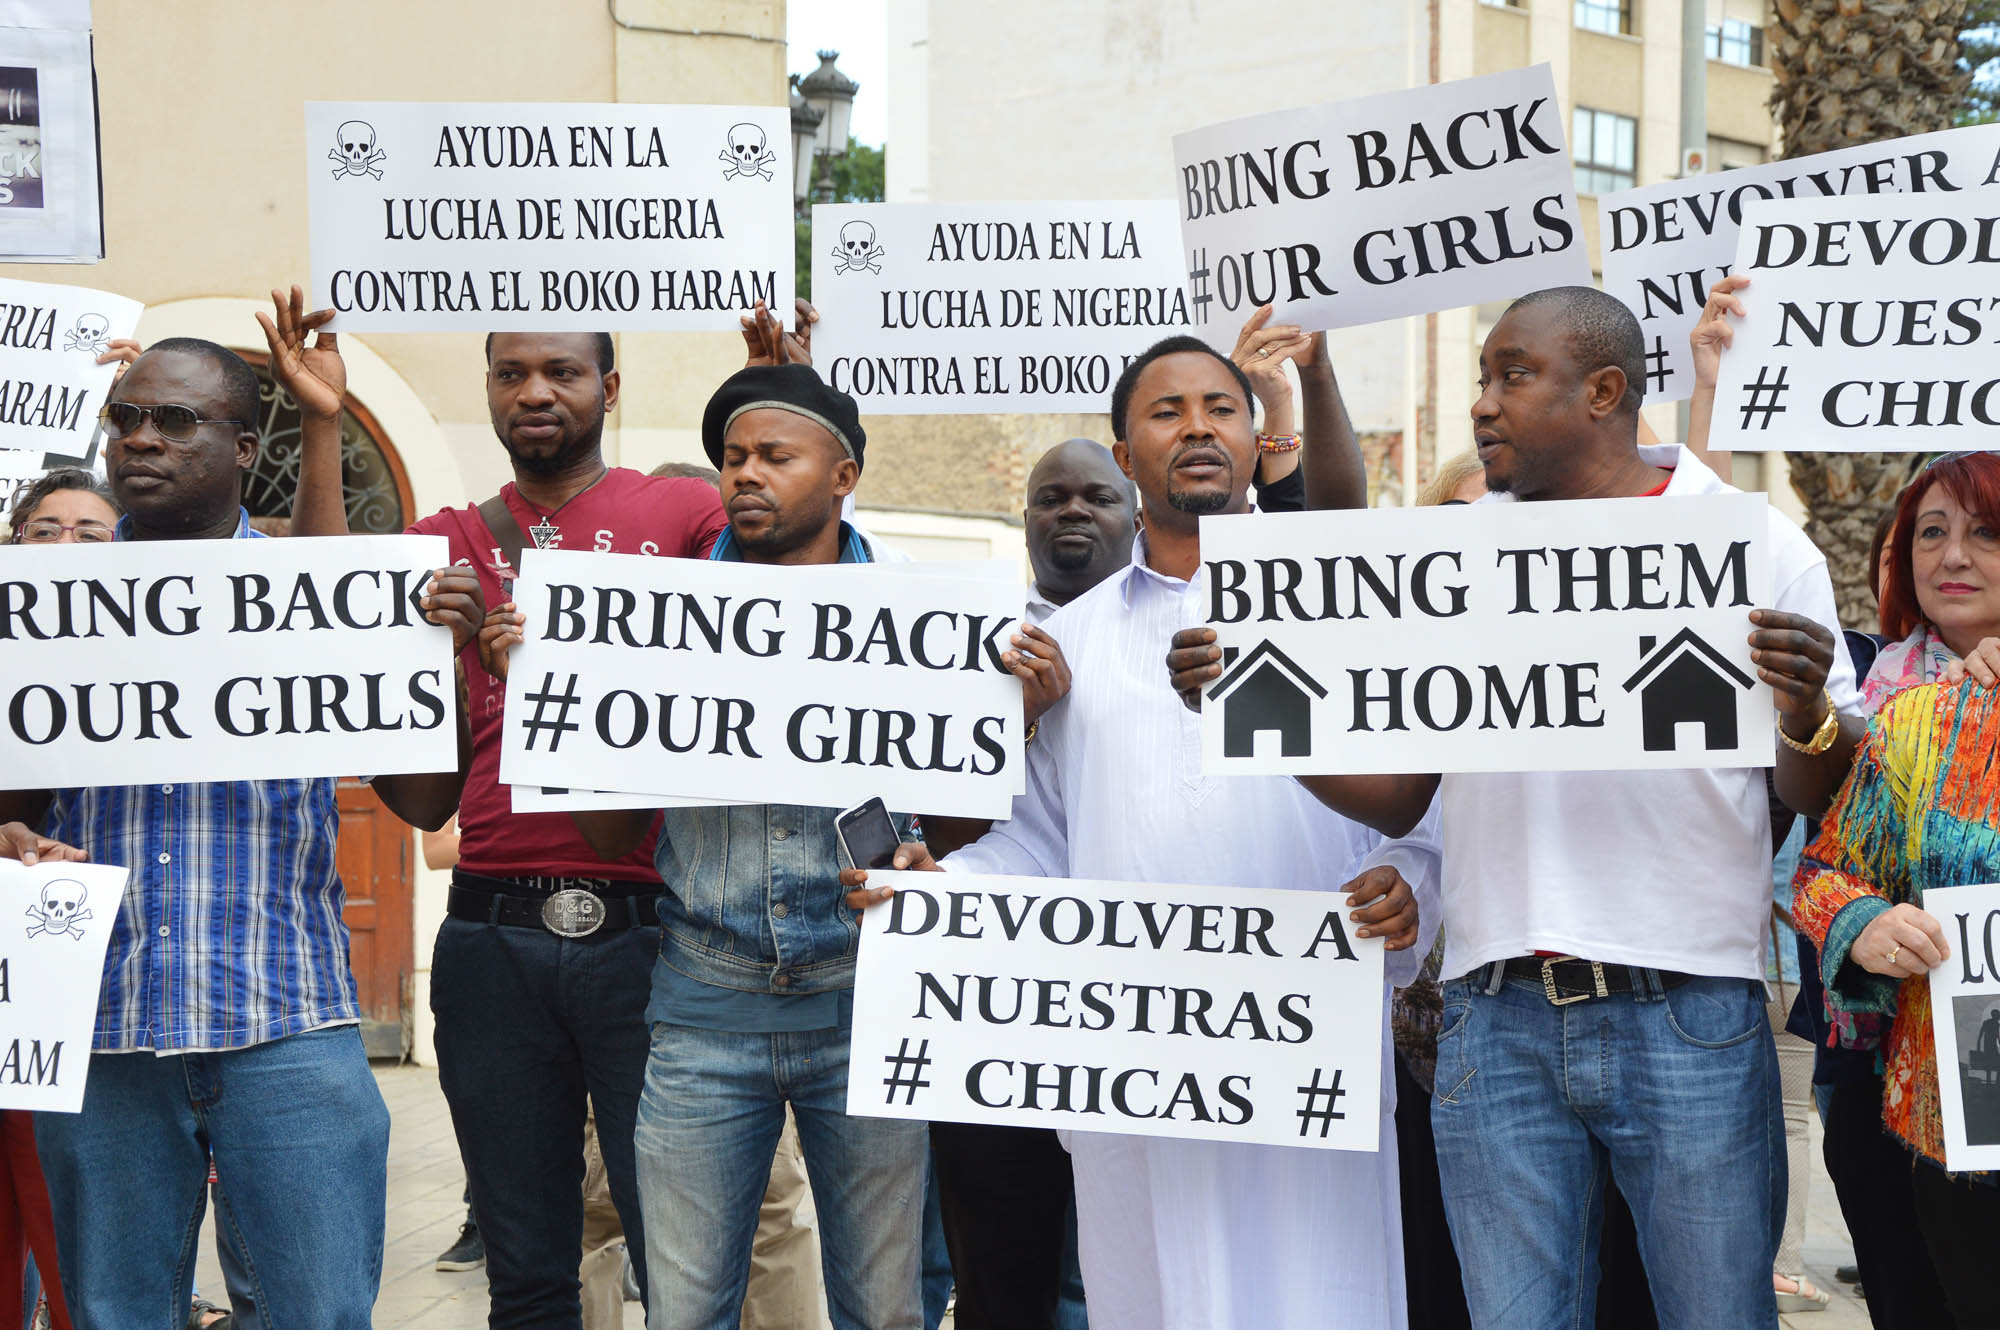 Association of Nigerians protest with locals against Boko Haram actions that claimed responsibility for abducting over 200 girls from a school in Chibok, Nigeria. Spain, 2014. Editorial credit: rSnapshotPhotos / Shutterstock.com.